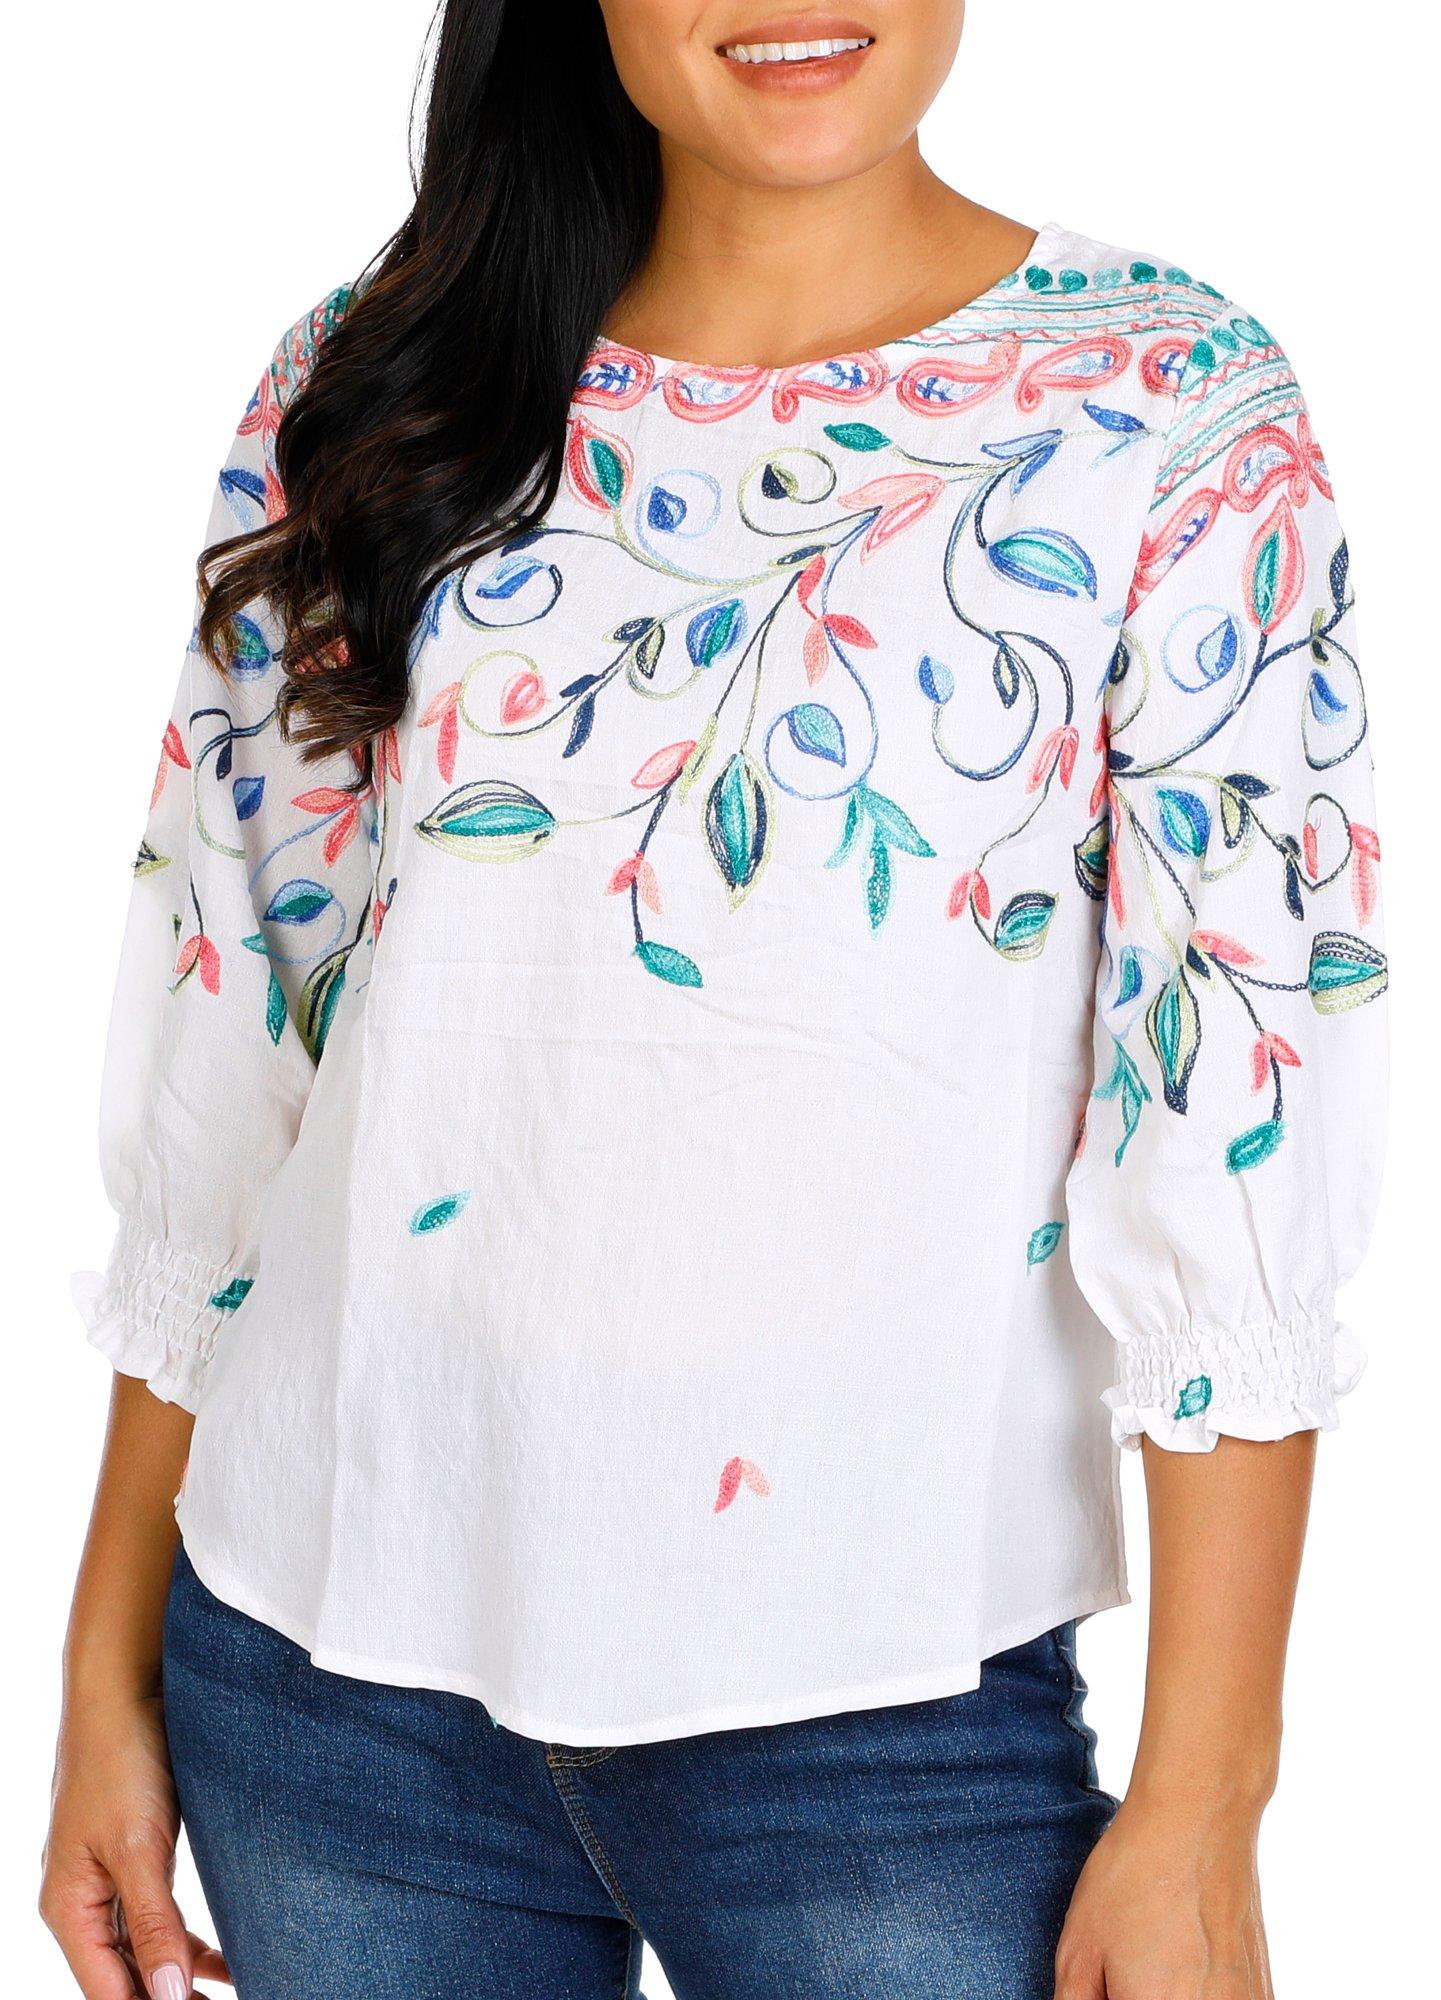 Women's Petite Embroidered Floral Print Top